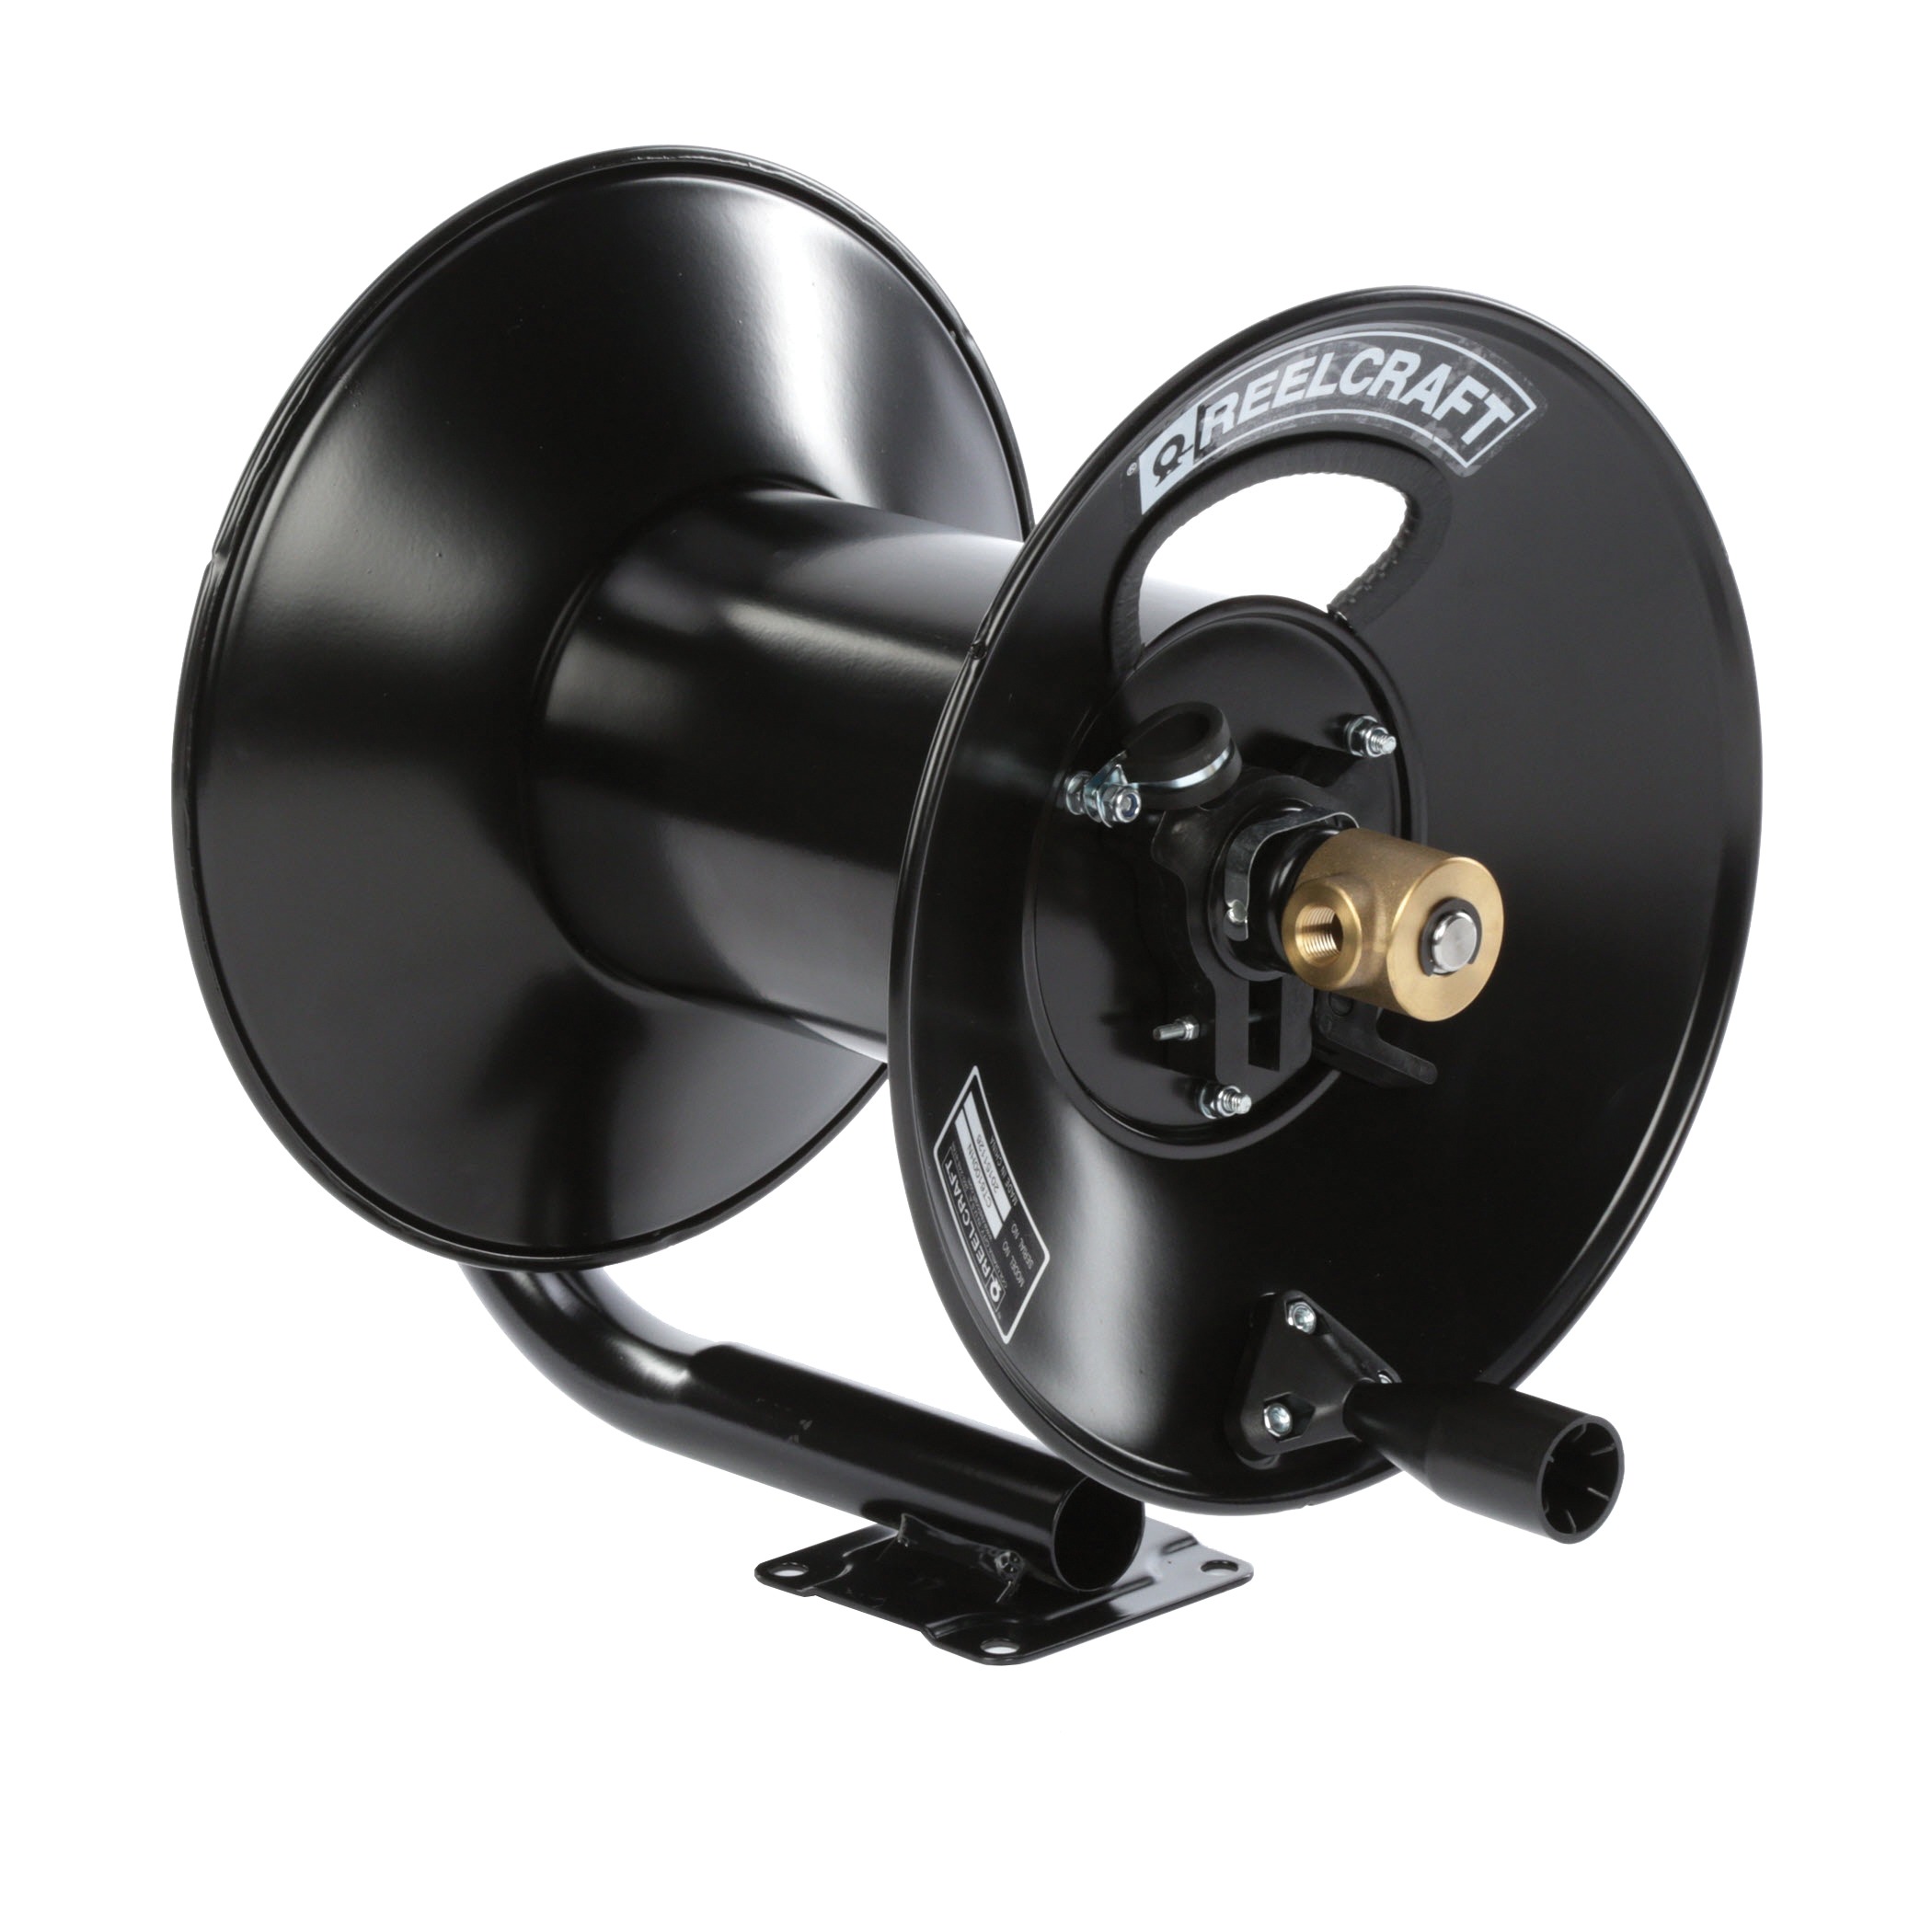 Reelcraft D9300 OMPBW - 3/4 in. x 50 ft. Ultimate Duty Hose Reel